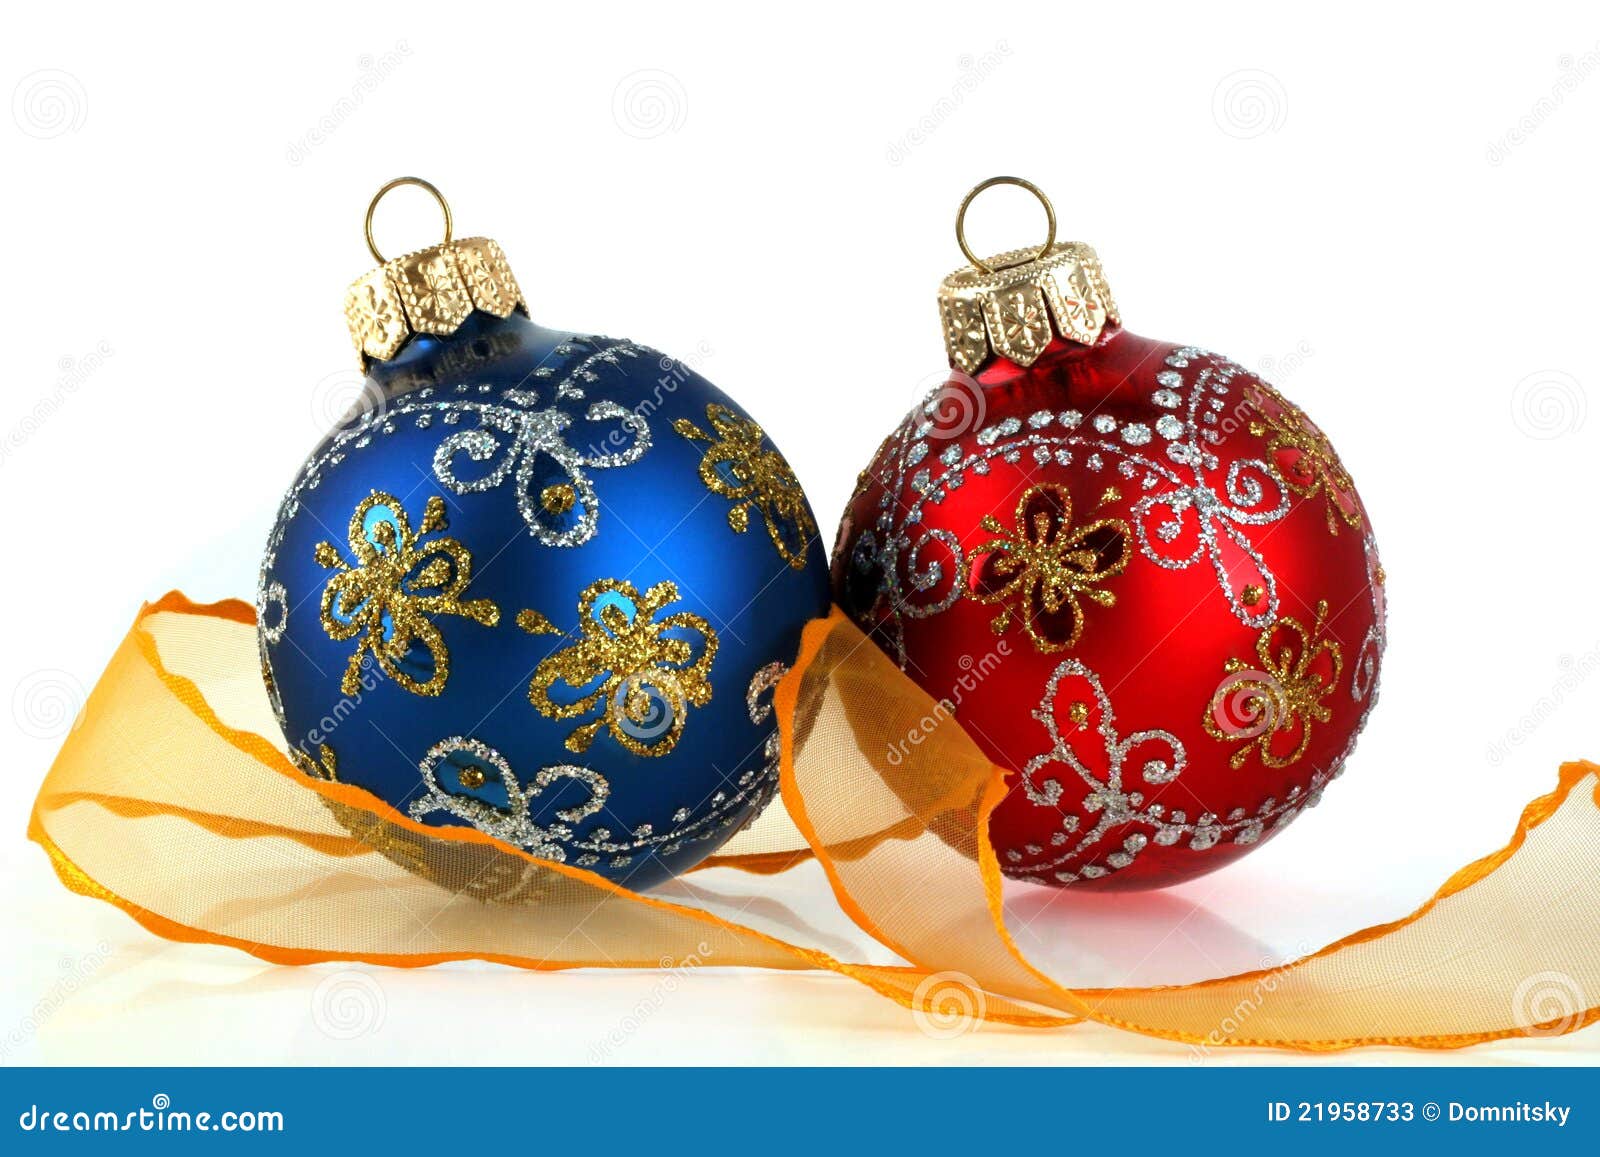 New-year Decoration on a White Background Stock Image - Image of ...